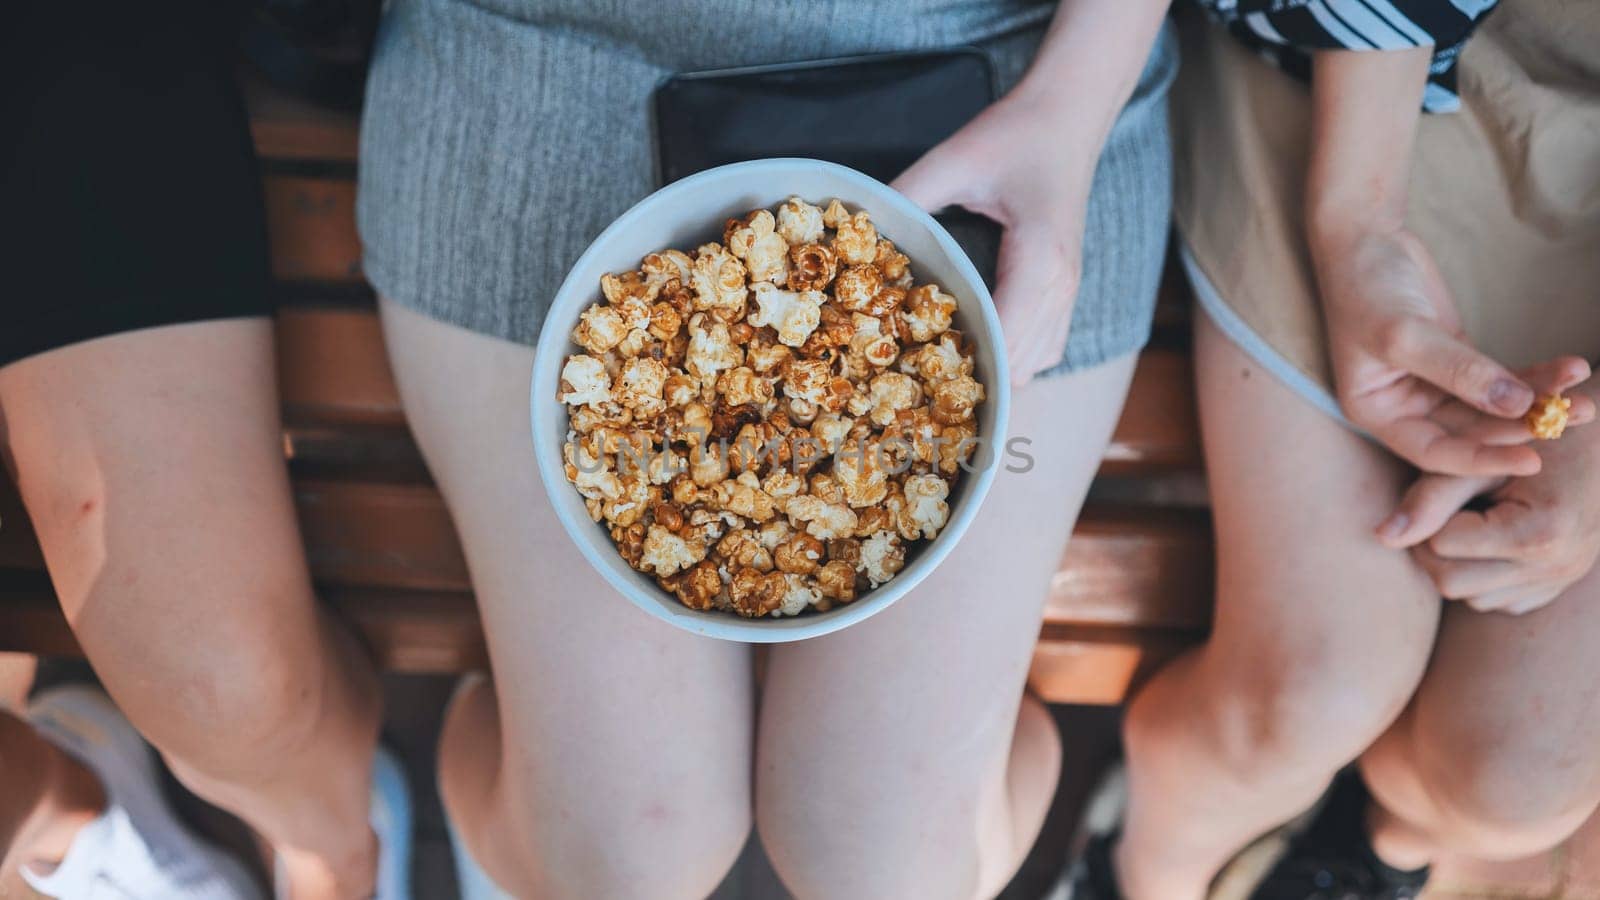 Friends eating popcorn on the street. Close-up of hands. by DovidPro